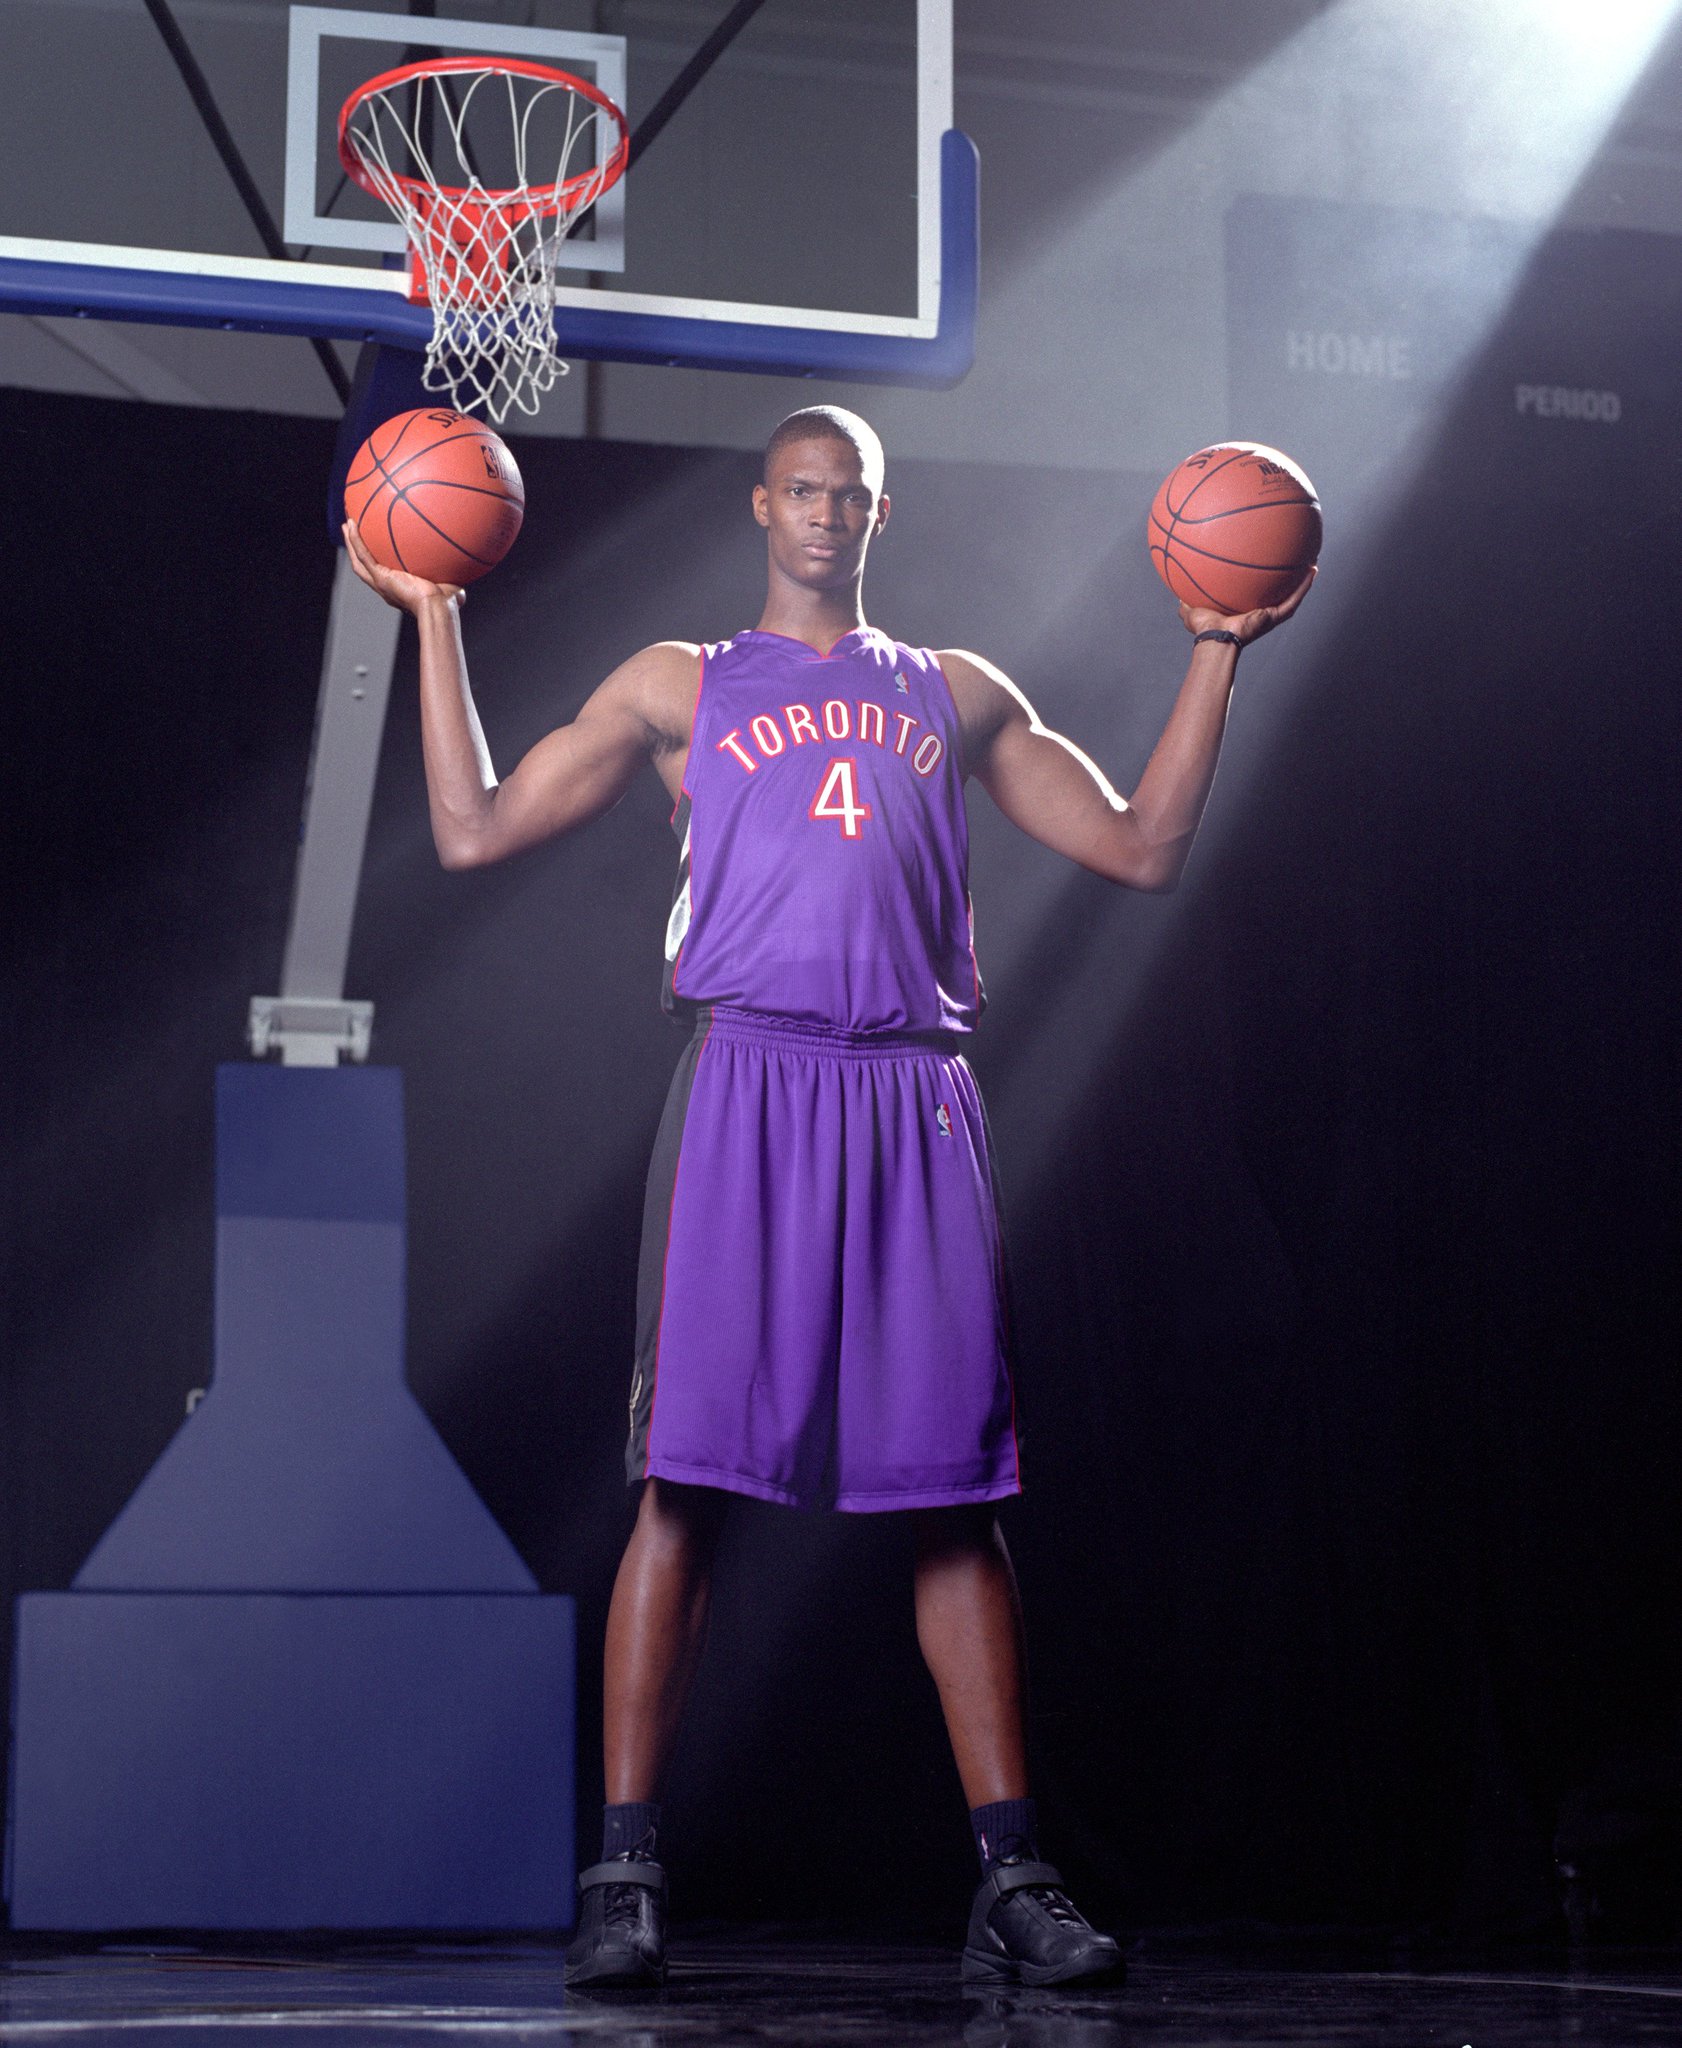 Once upon a time...

Happy birthday to Chris Bosh!! 